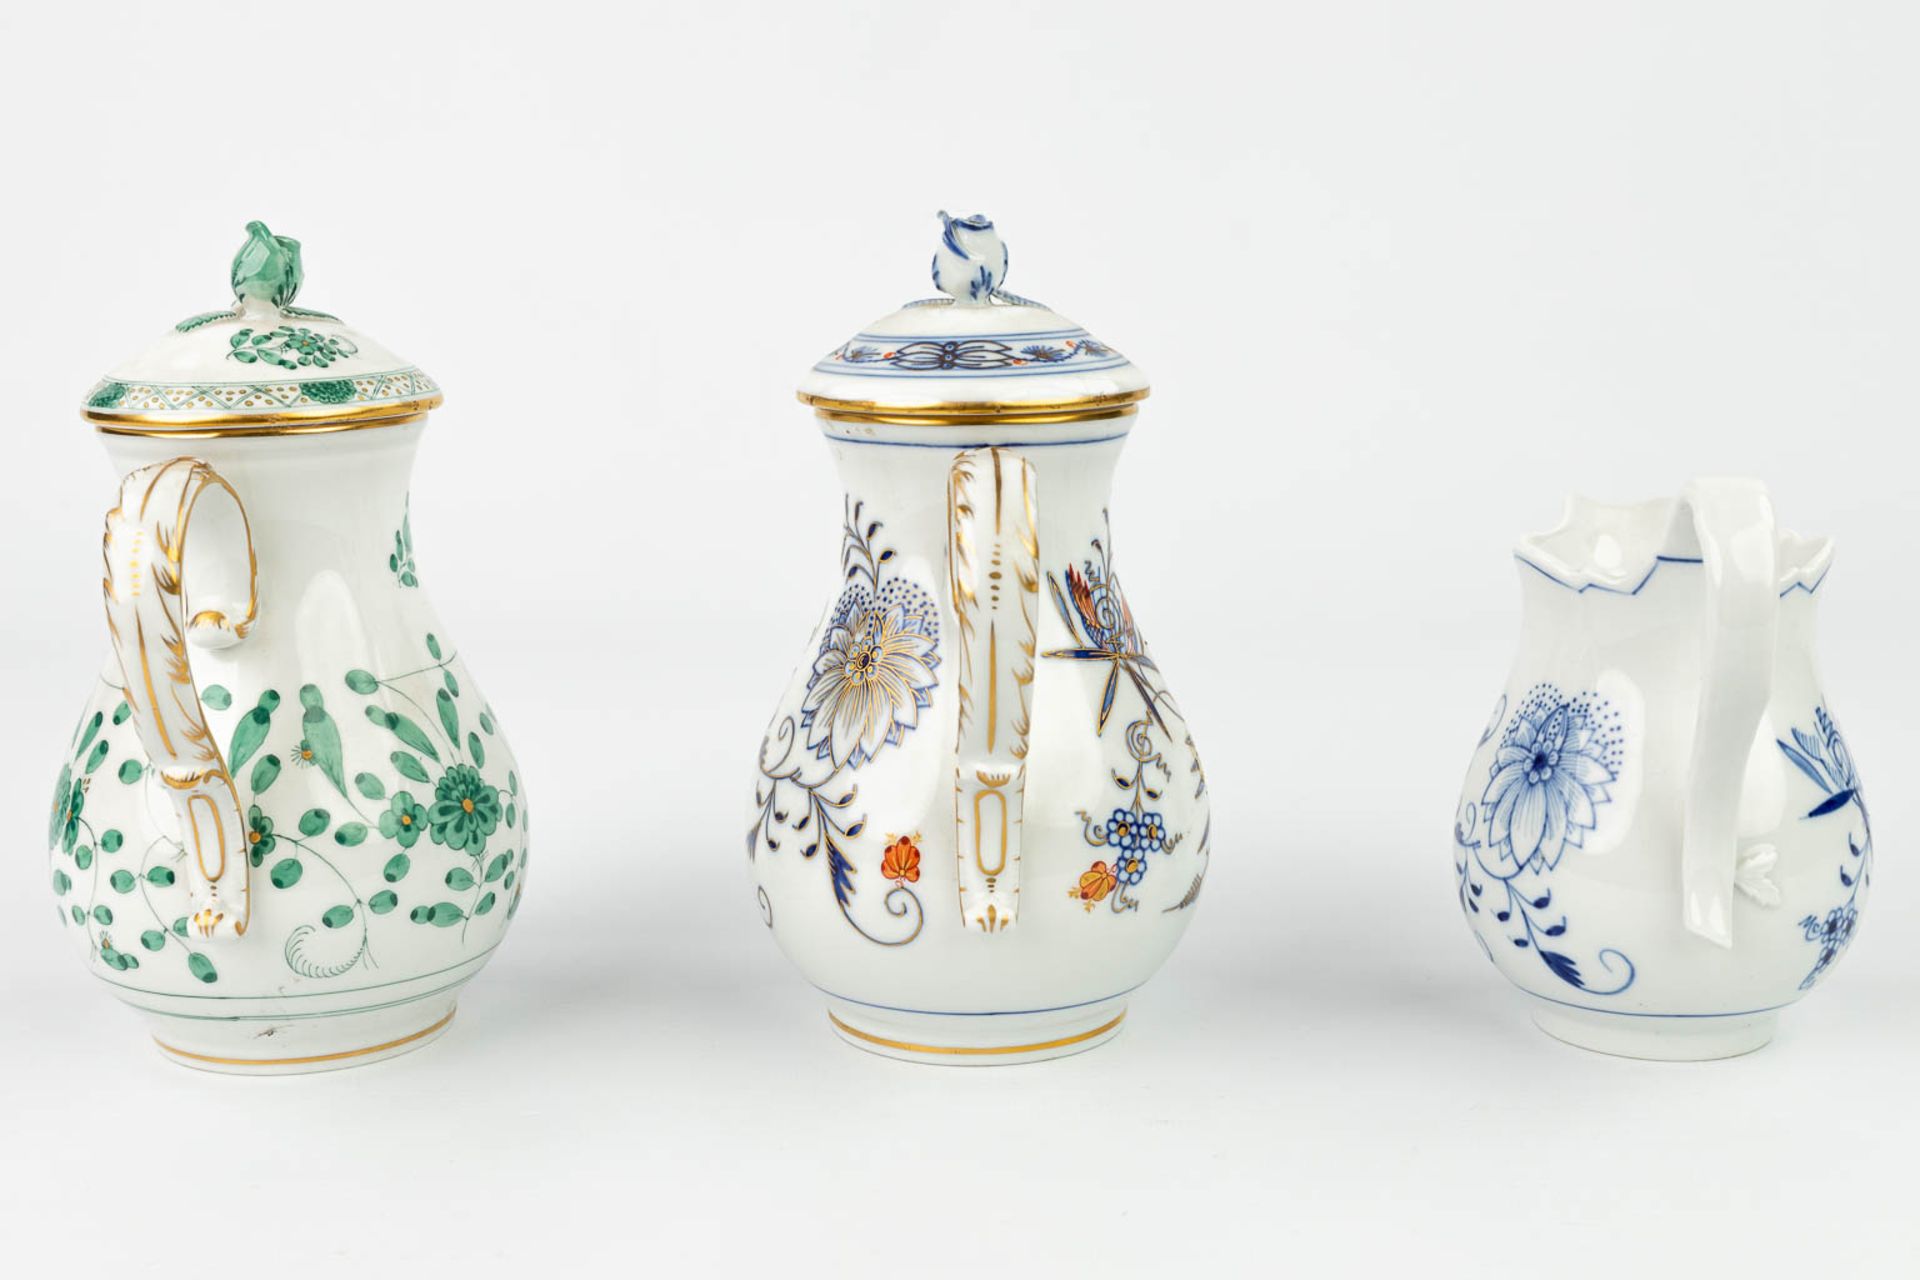 A collection of 2 coffee pots and a milk jug made by Meissen porcelain, 20th century. (H:17cm) - Image 16 of 17